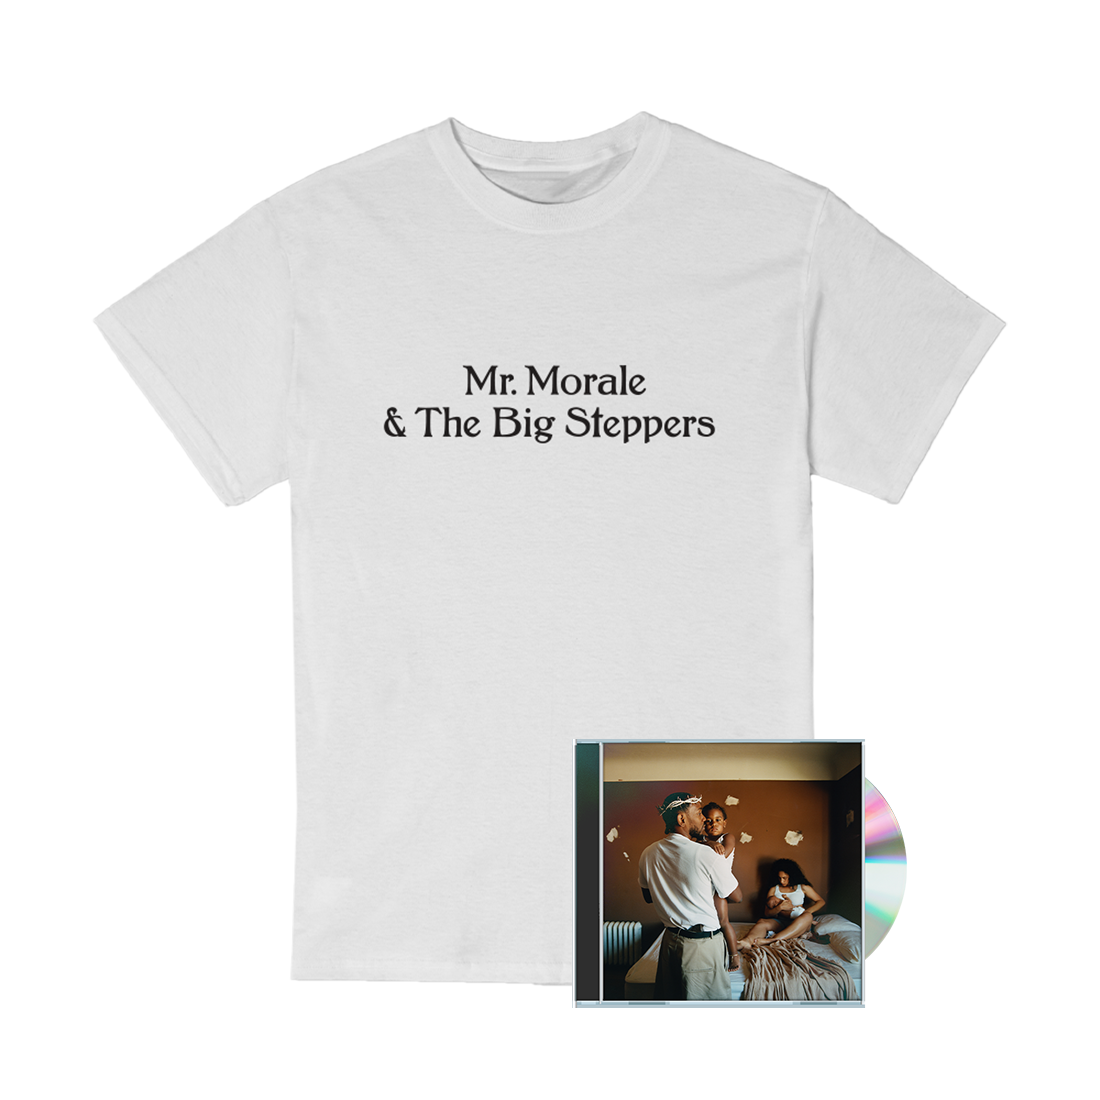 Mr. Morale & The Big Steppers: CD + T-Shirt (White)